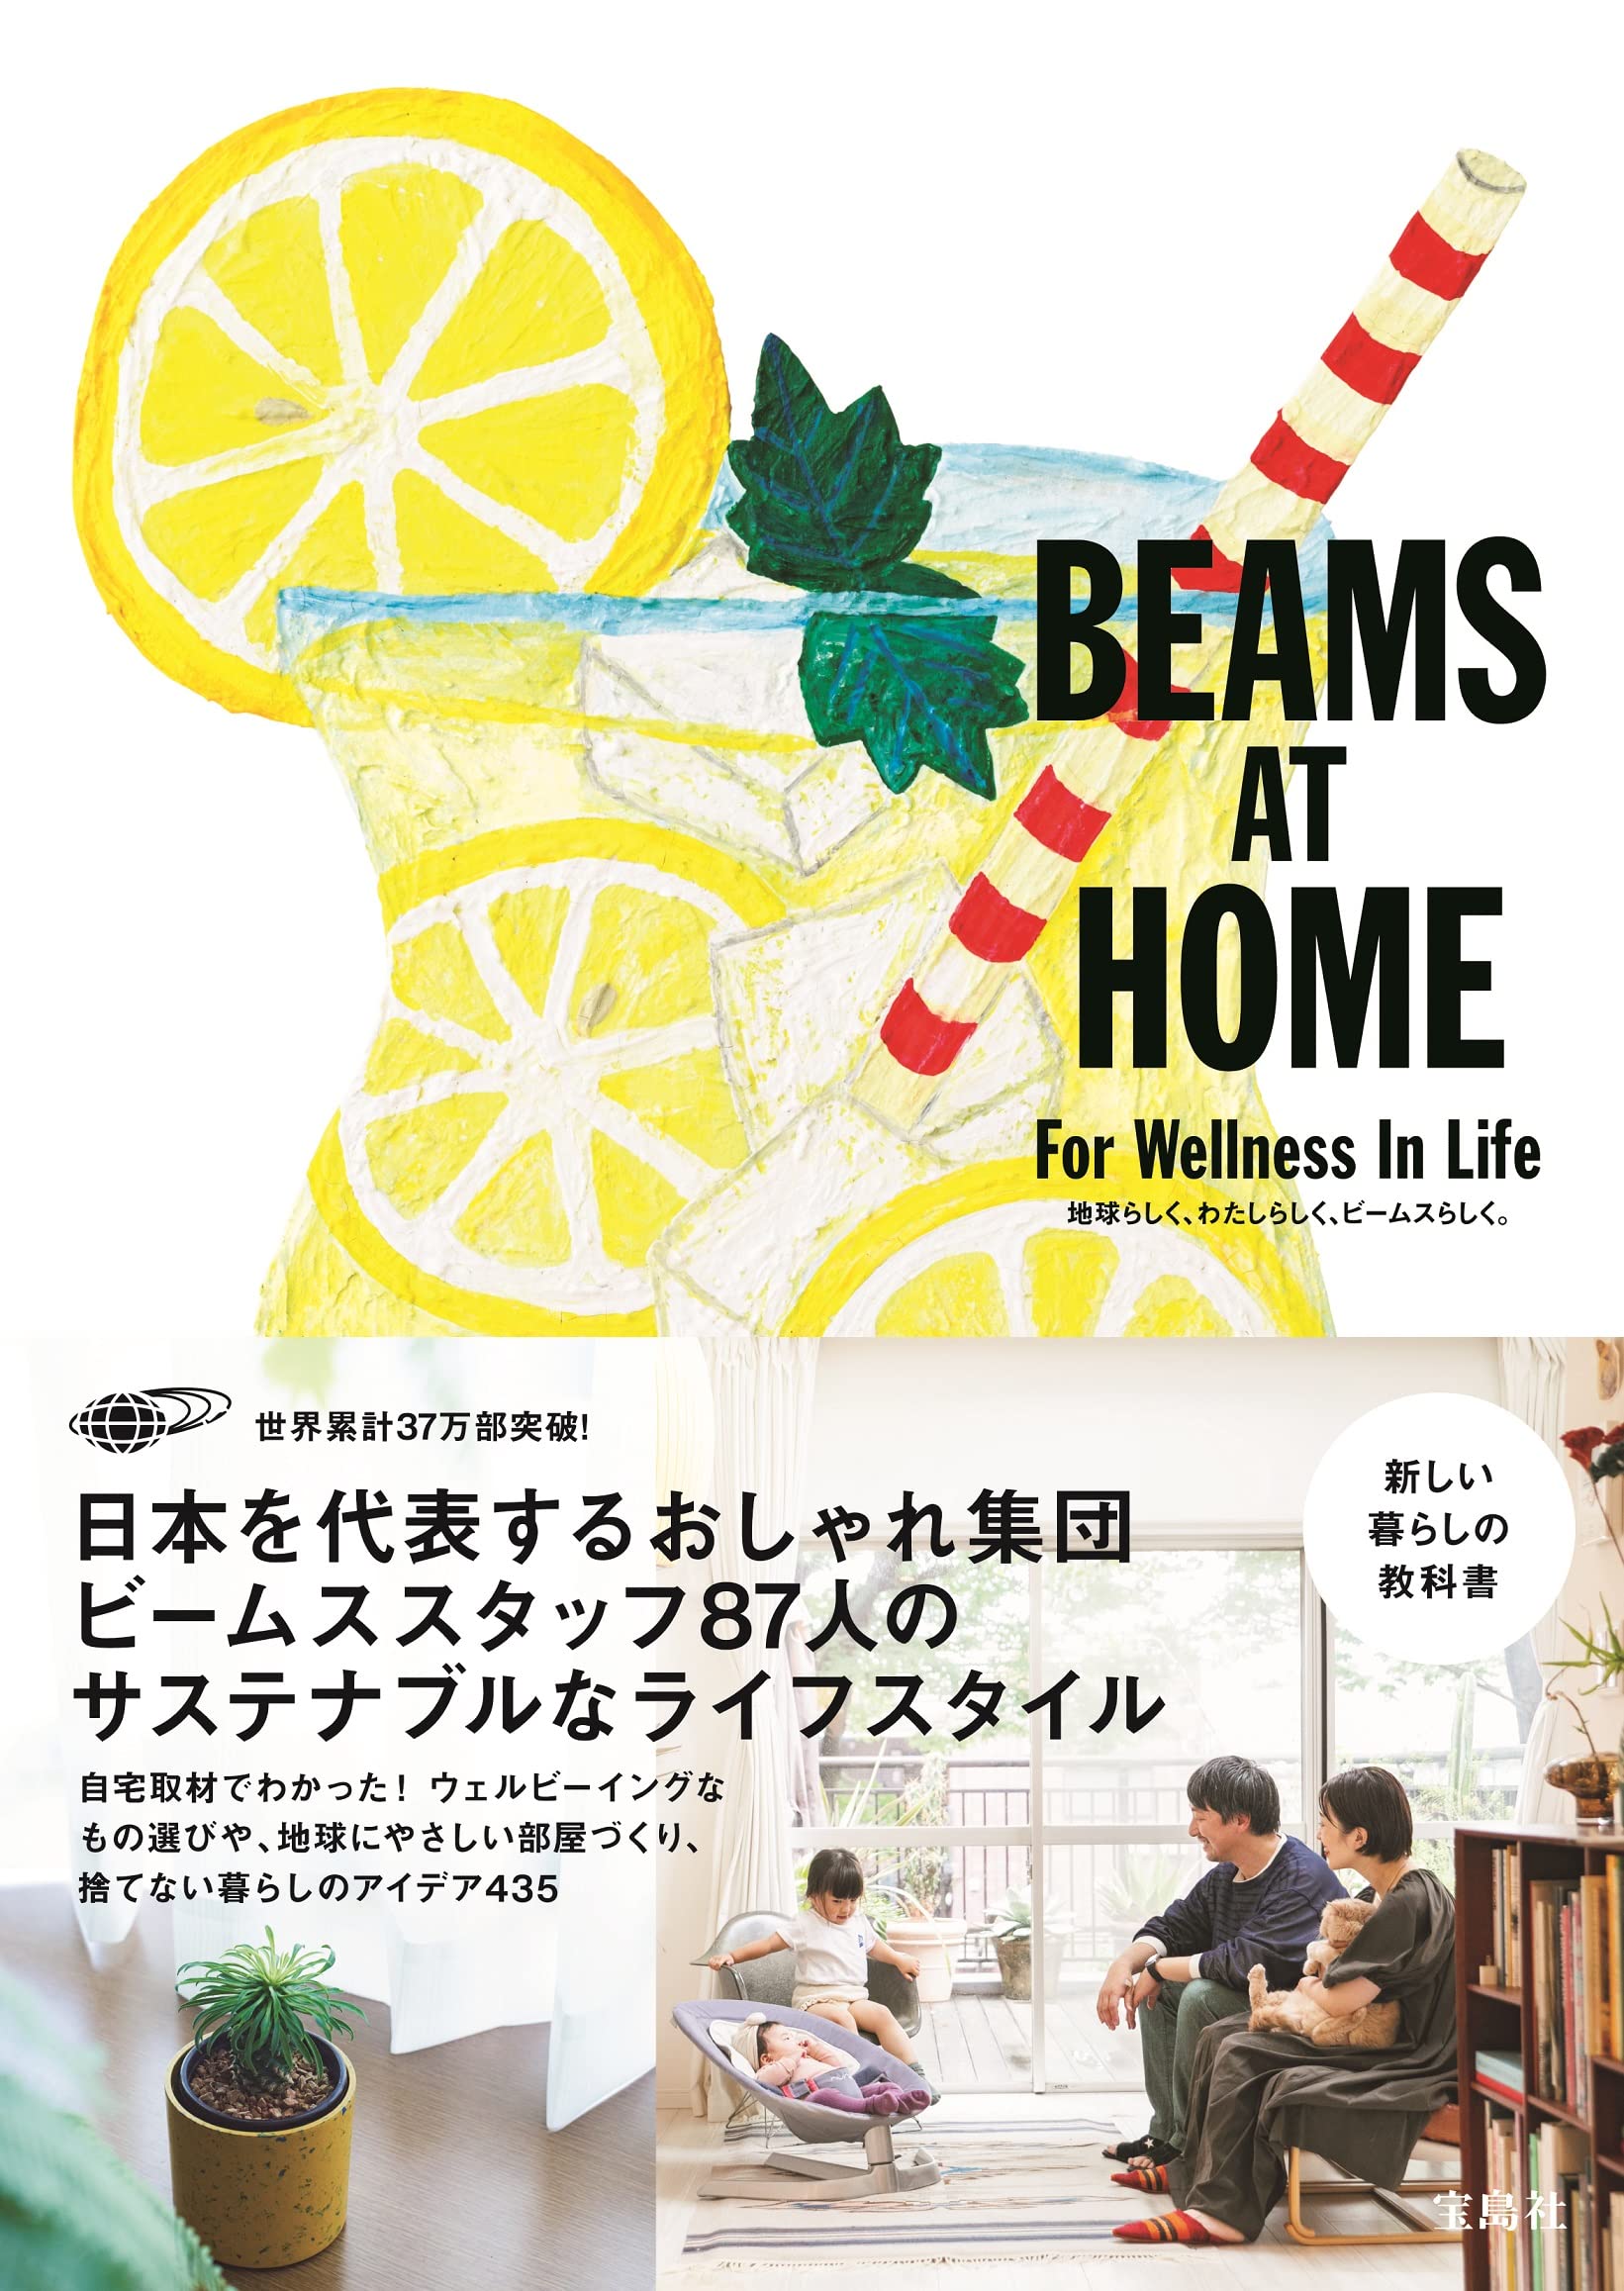 BEAMS AT HOME For Wellness In Life